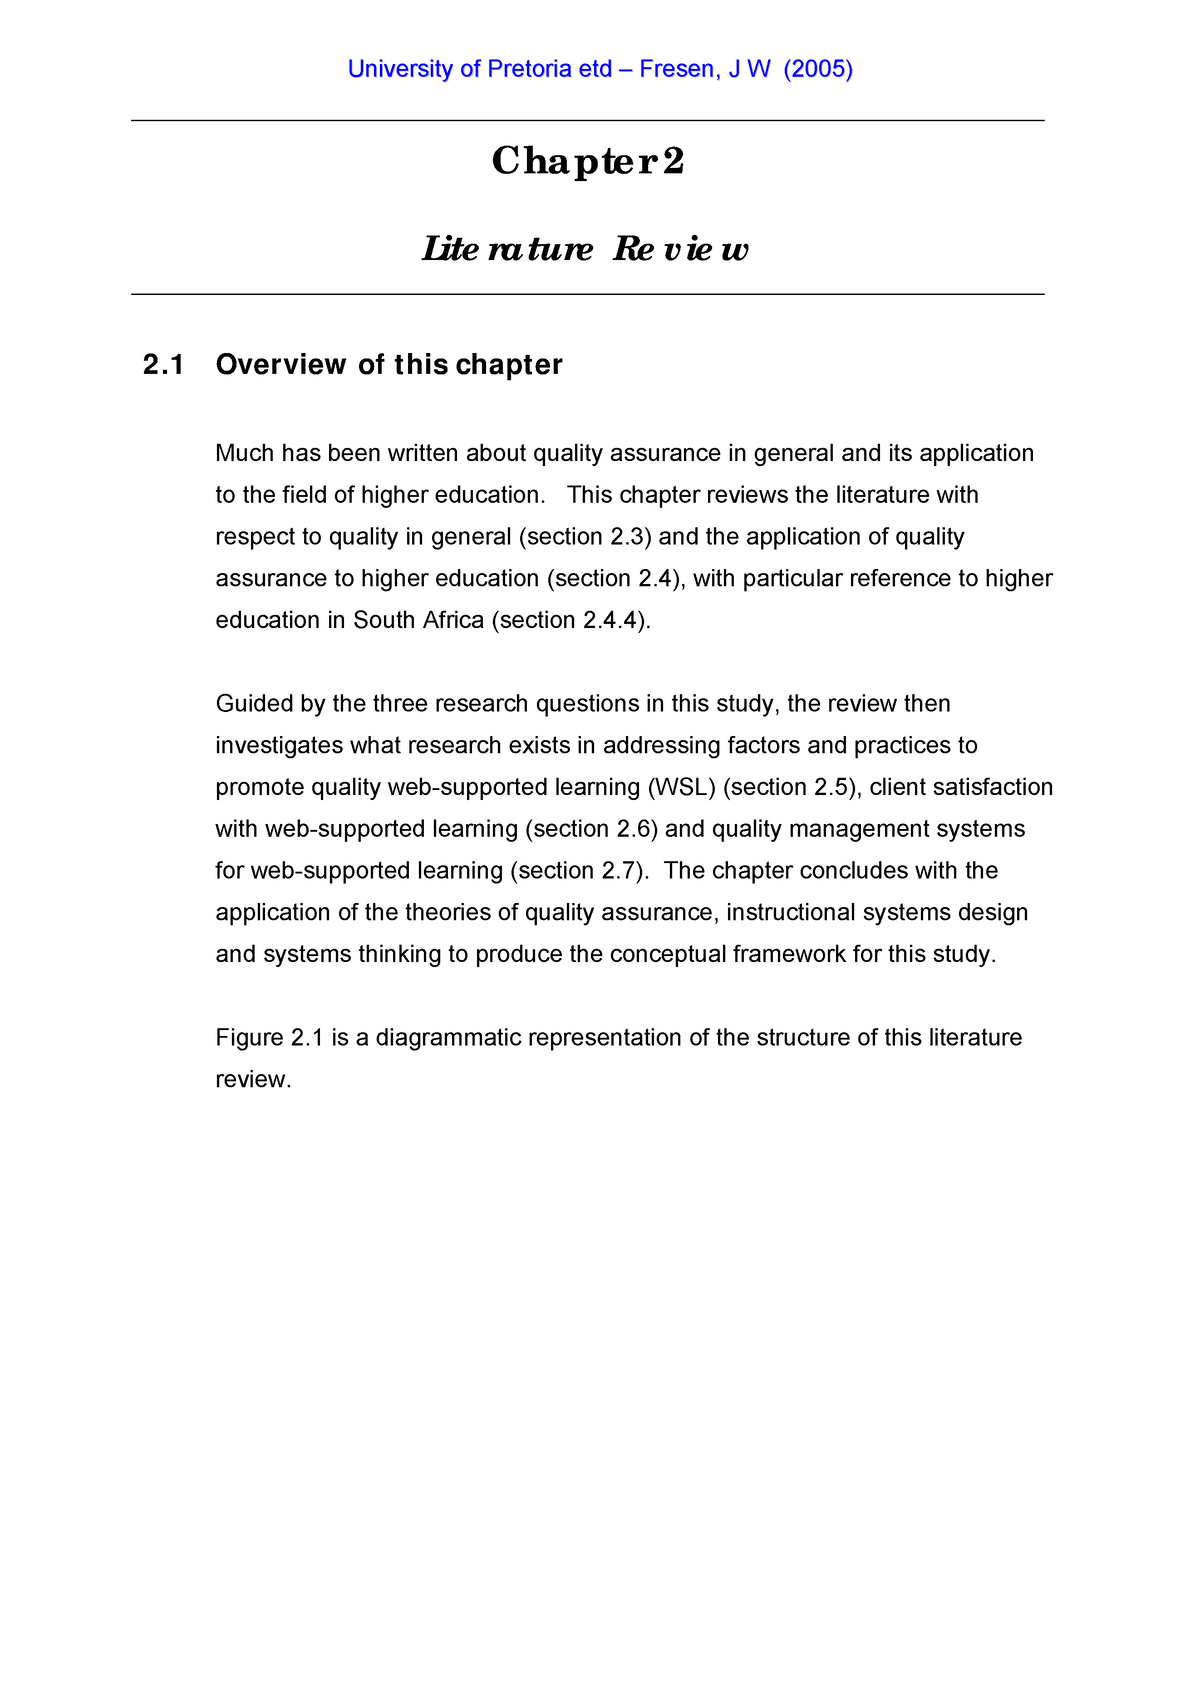 research chapter 2 example pdf